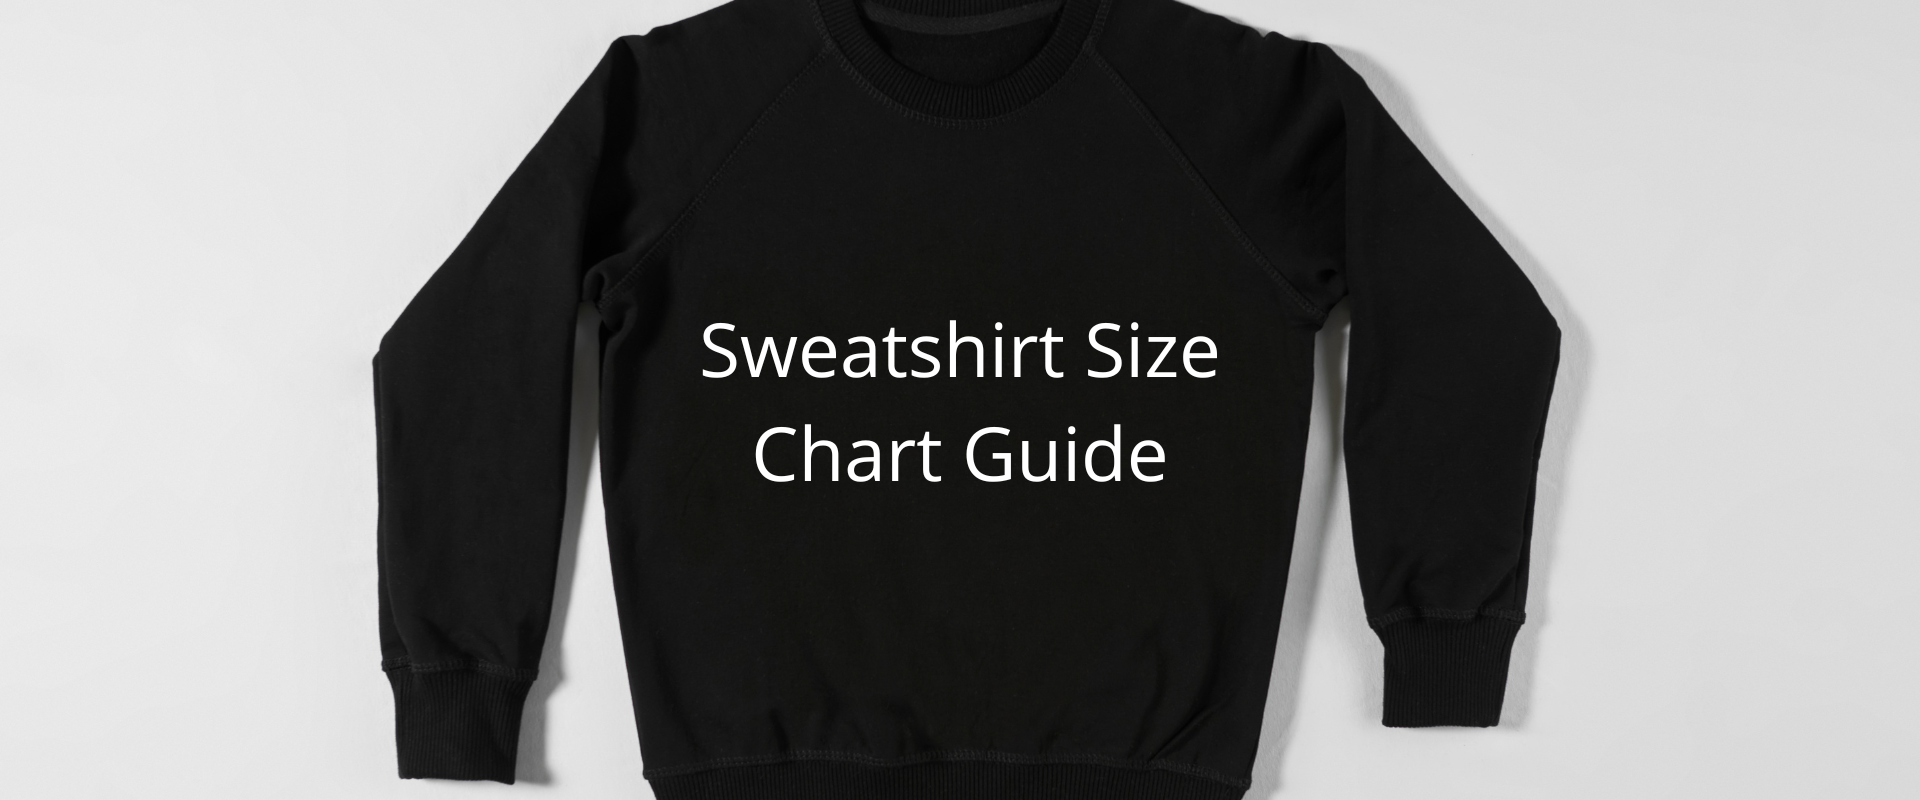 Best Sweatshirt Size chart guide to pick the right one for yourself